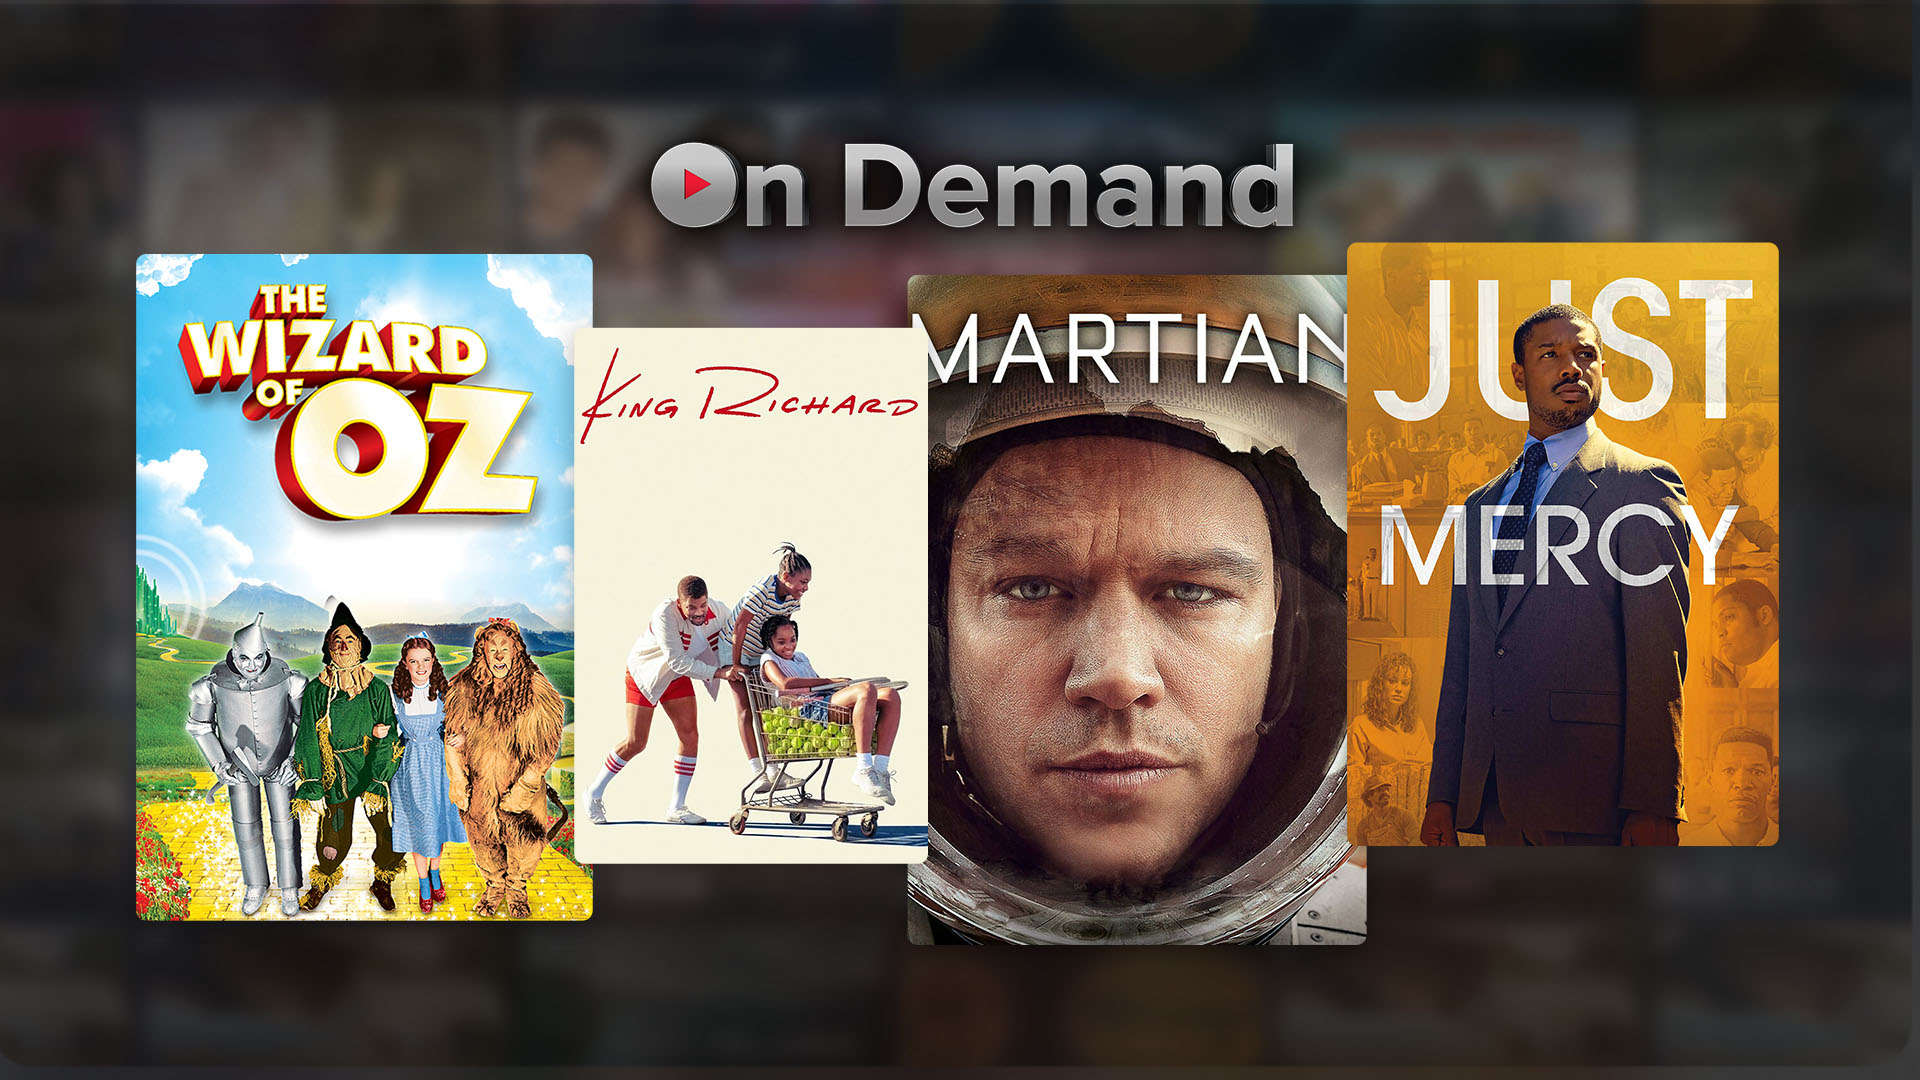 Pay-Per-View and On Demand Titles, MyDISH